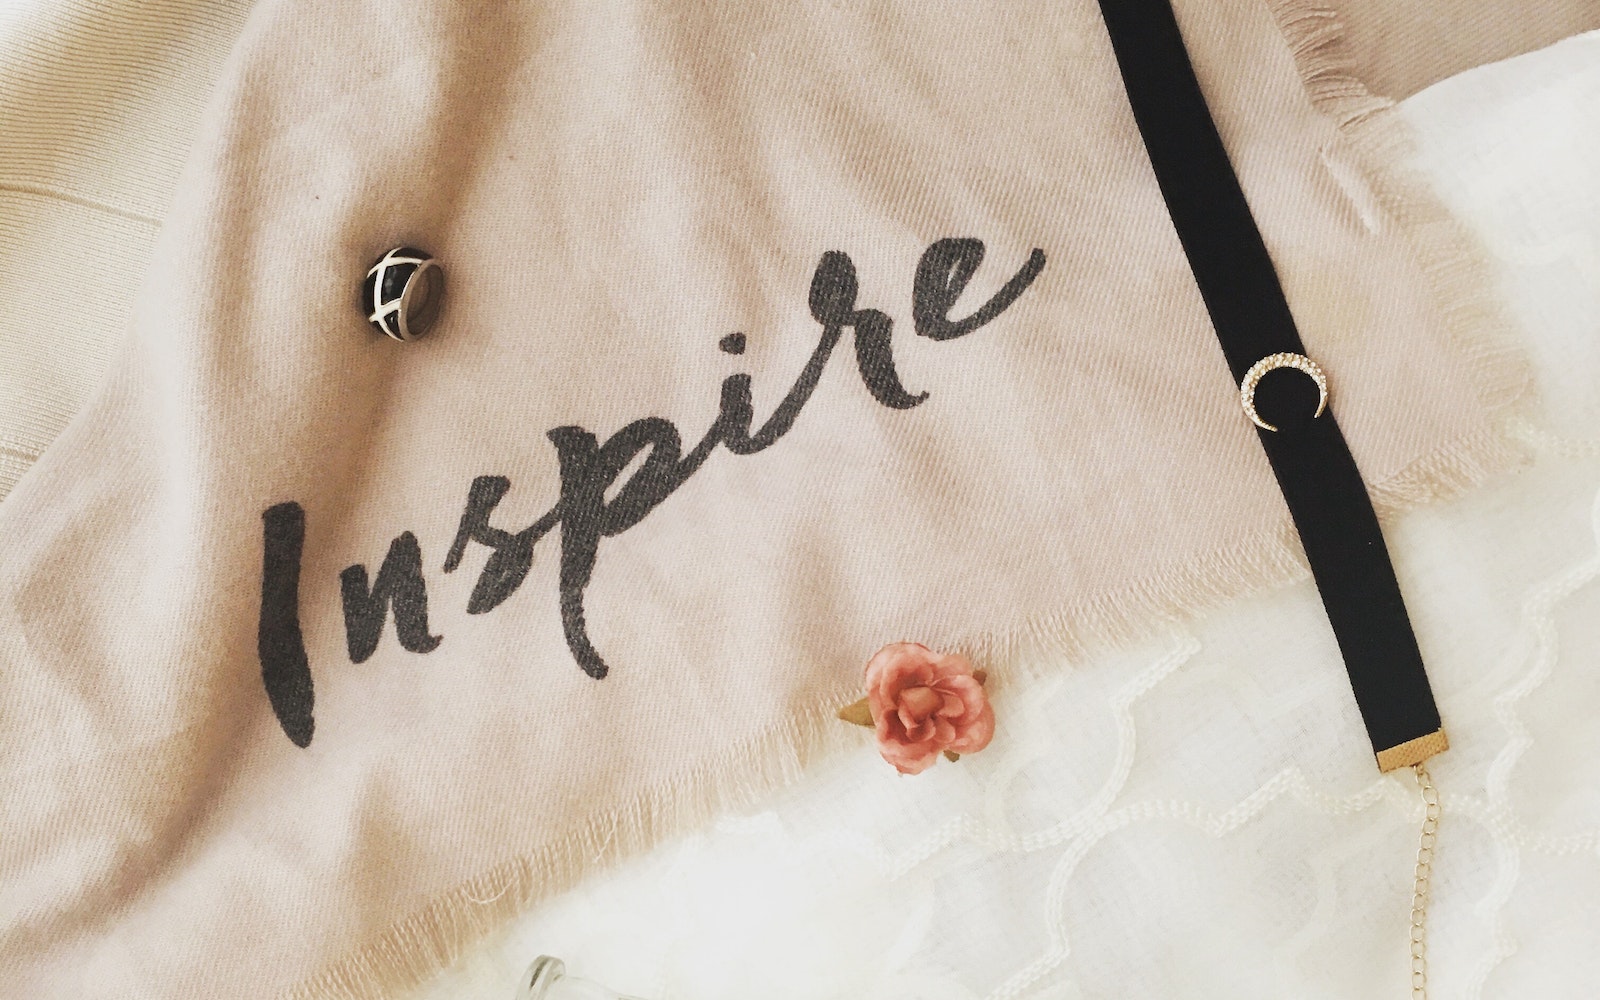 The text "inspire" written on a cloth